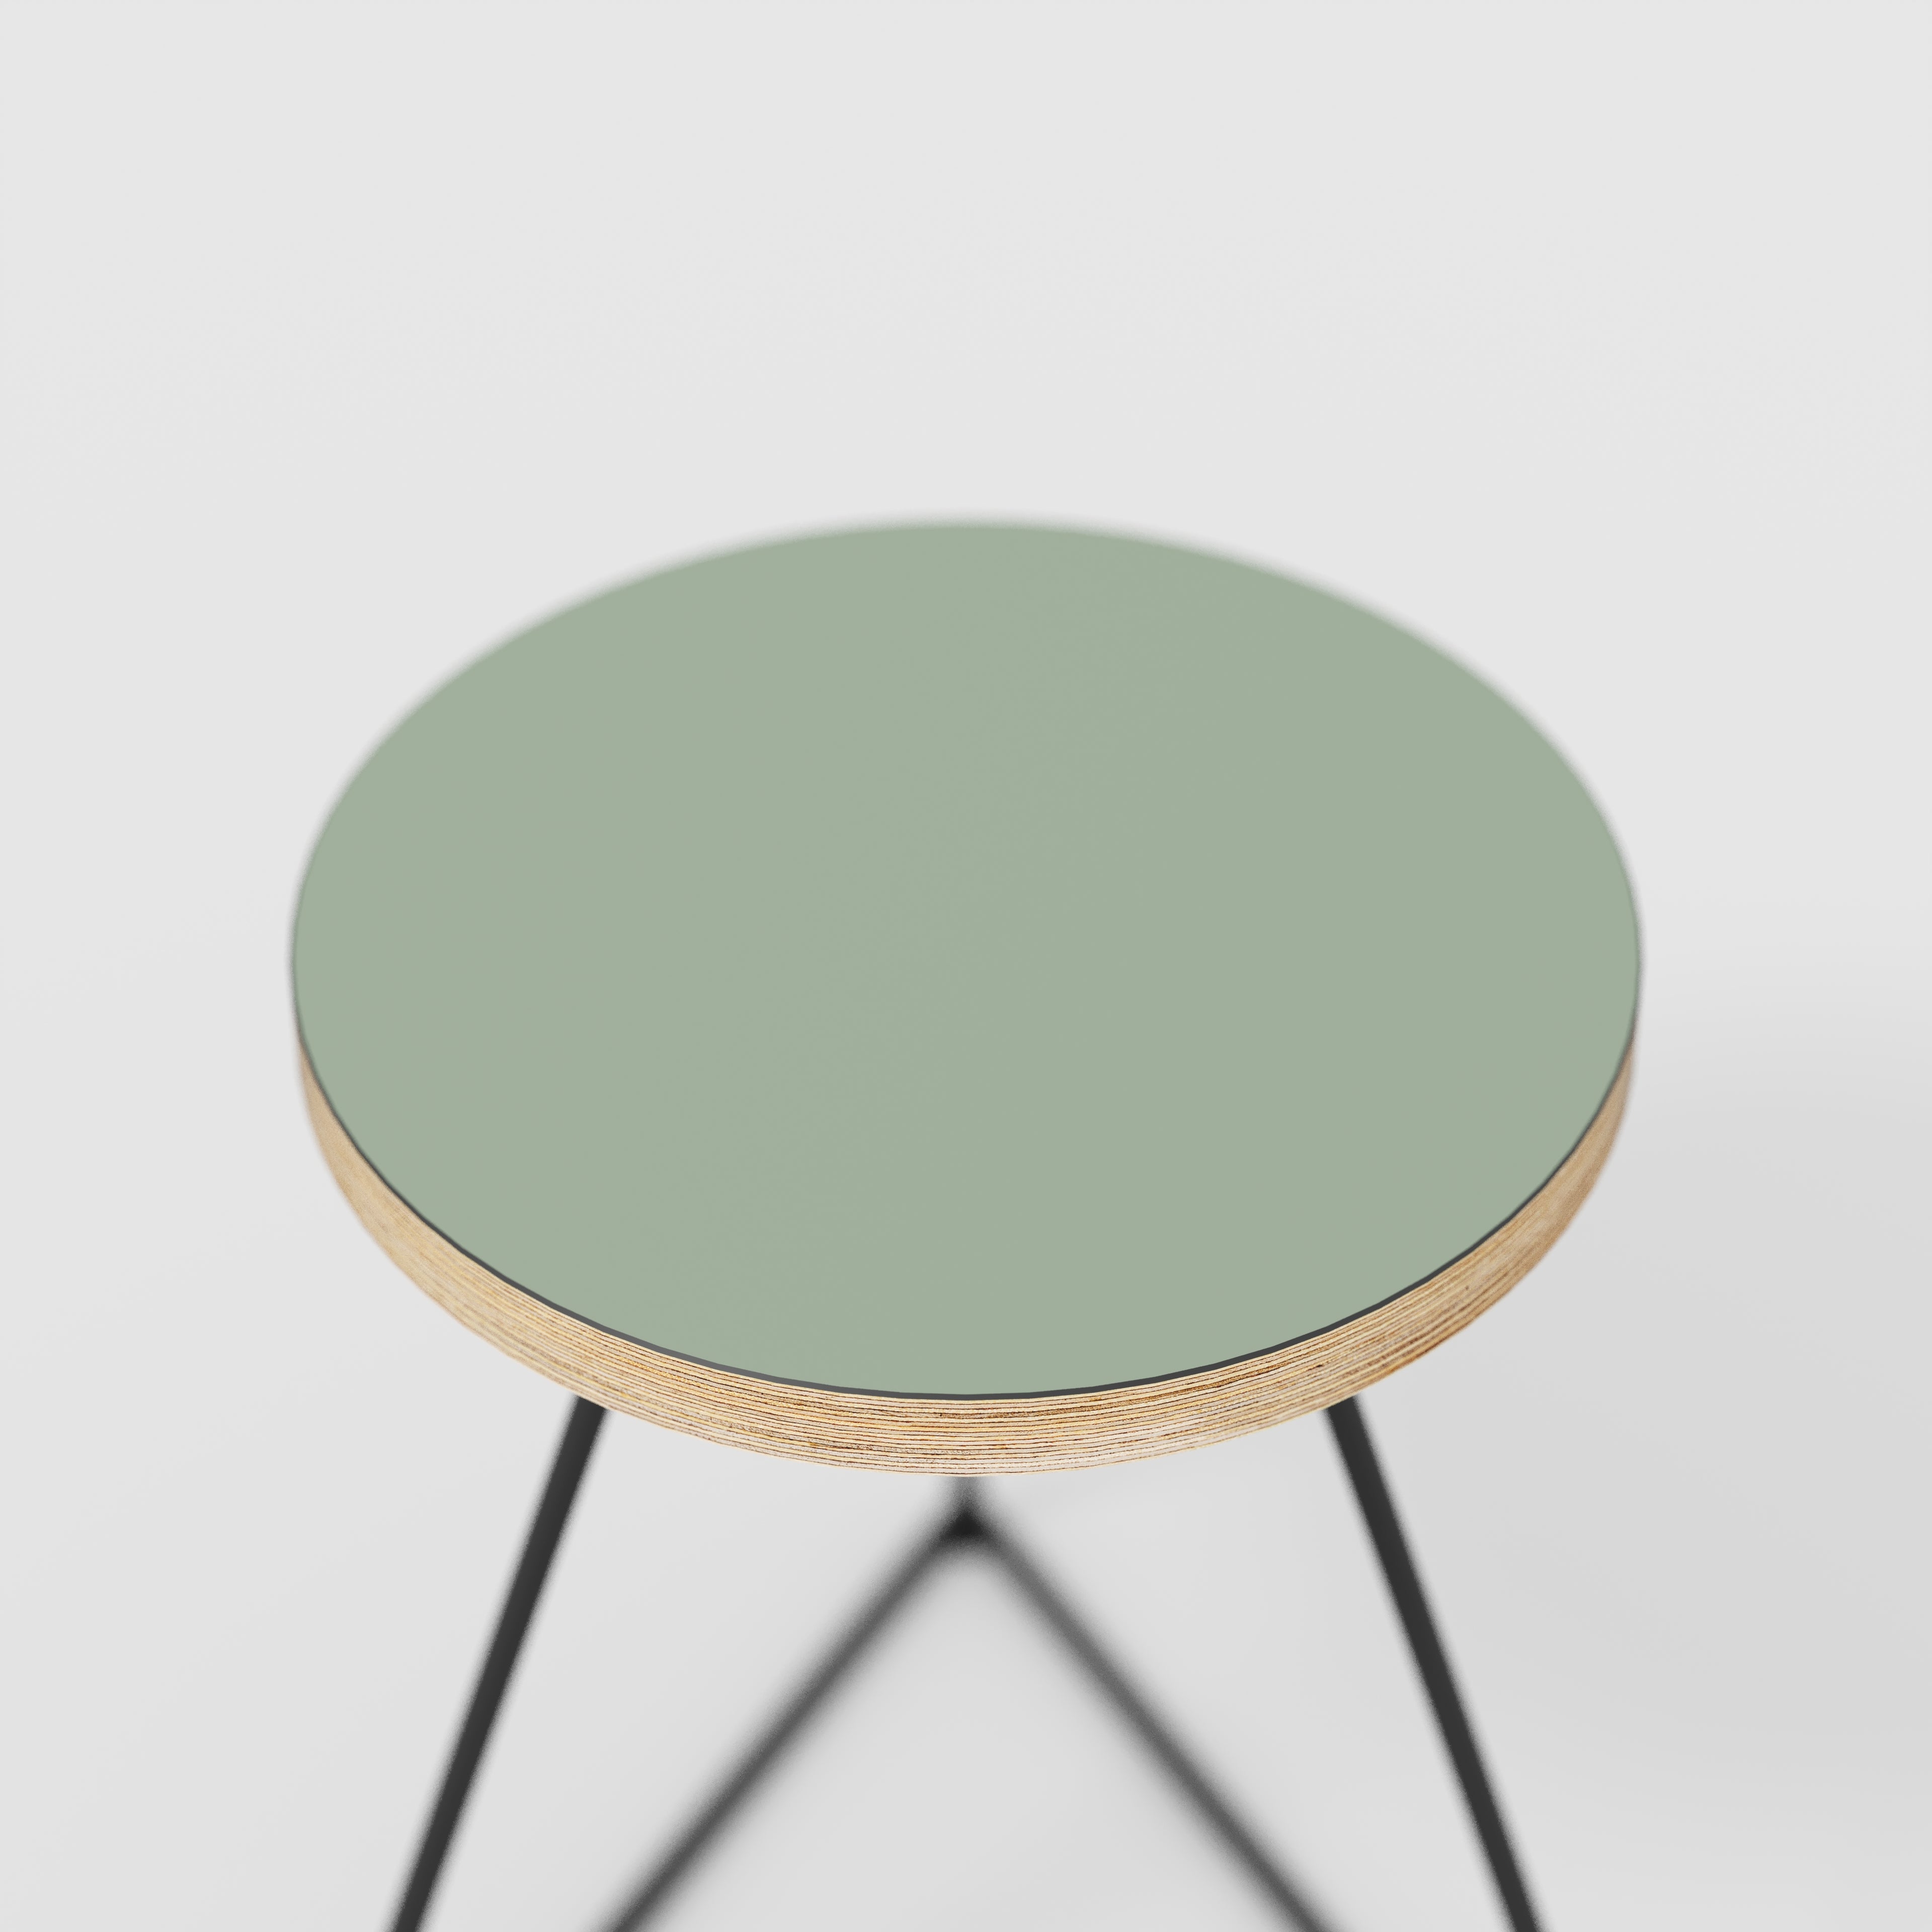 Stool with Black Prism Base - Formica Green Slate